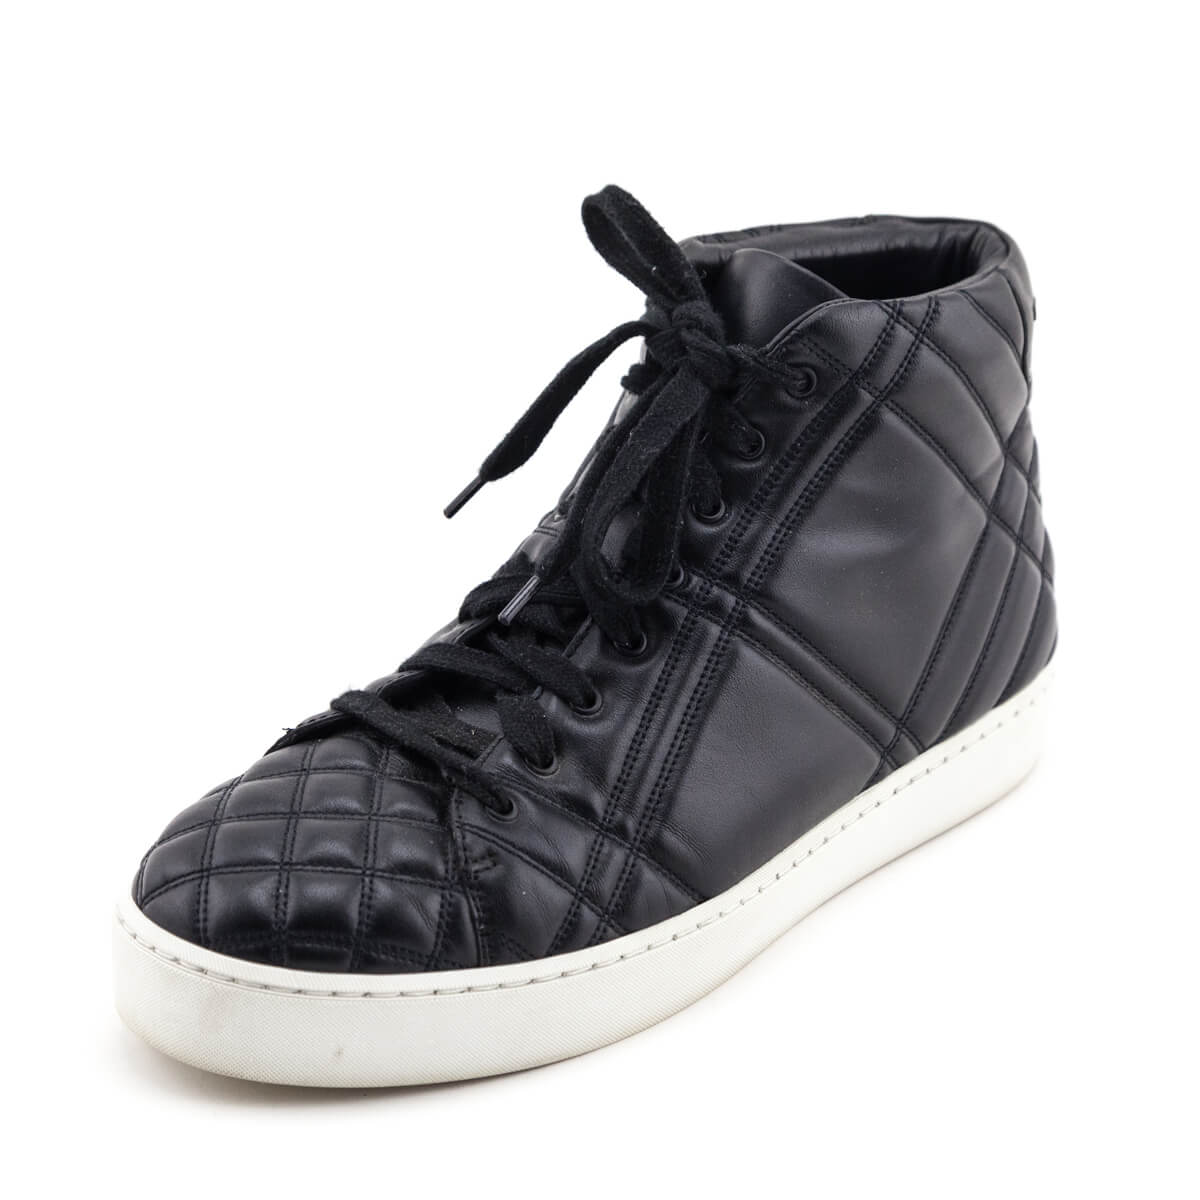 Burberry Black Quilted Check Westford High Top Sneakers Size US 9 | EU 39 - Love that Bag etc - Preowned Authentic Designer Handbags & Preloved Fashions